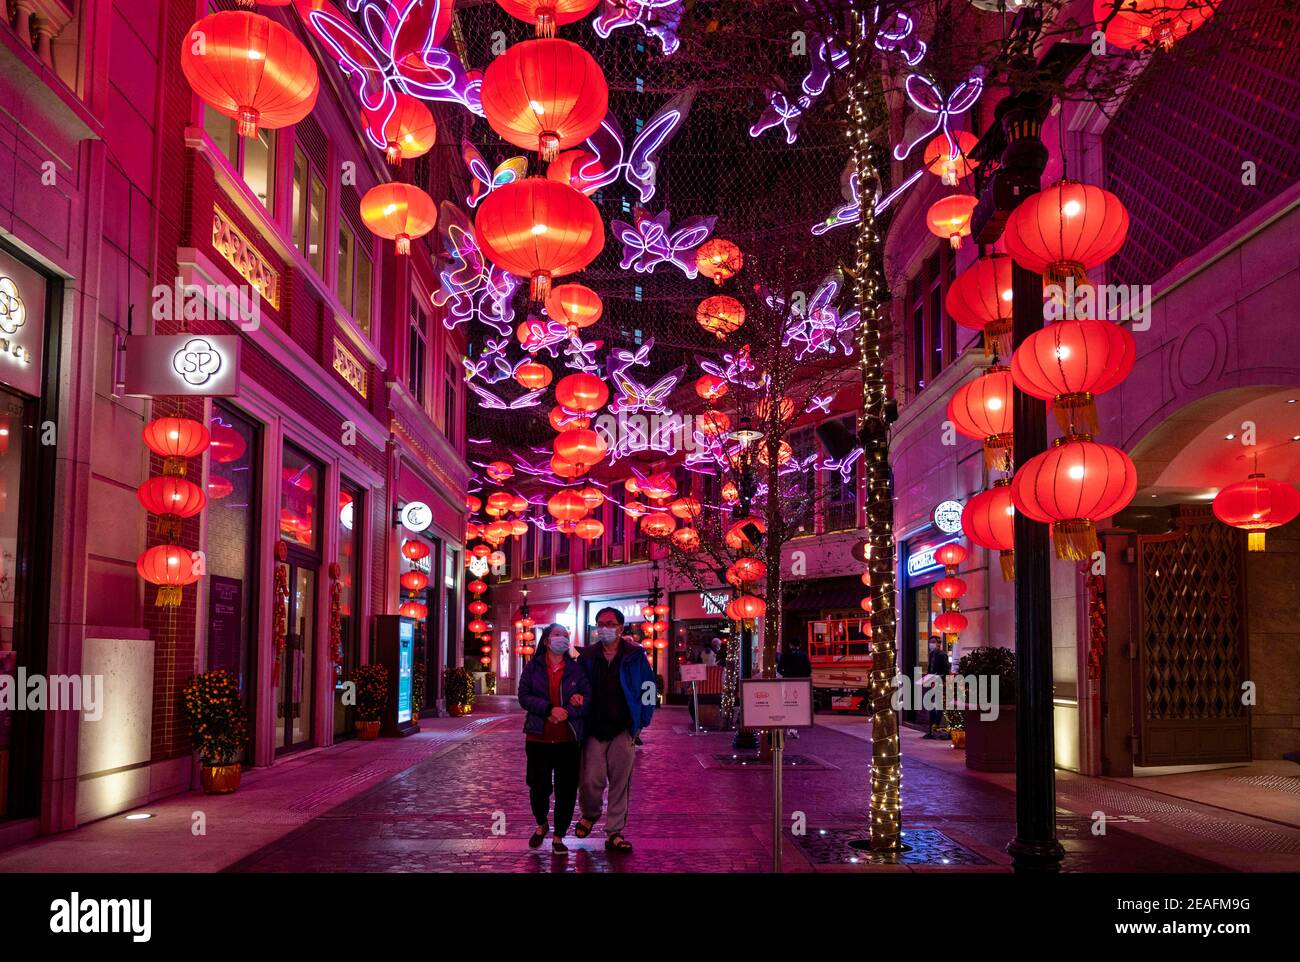 January 31, 2021, Hong Kong, China: A couple wearing masks walks under hundreds of red lanterns hanged from the ceiling at Lee Tung Avenue in Hong Kong to celebrate the Chinese Lunar New Year festival and the year of the Ox. (Credit Image: © Miguel Candela/SOPA Images via ZUMA Wire) Stock Photo